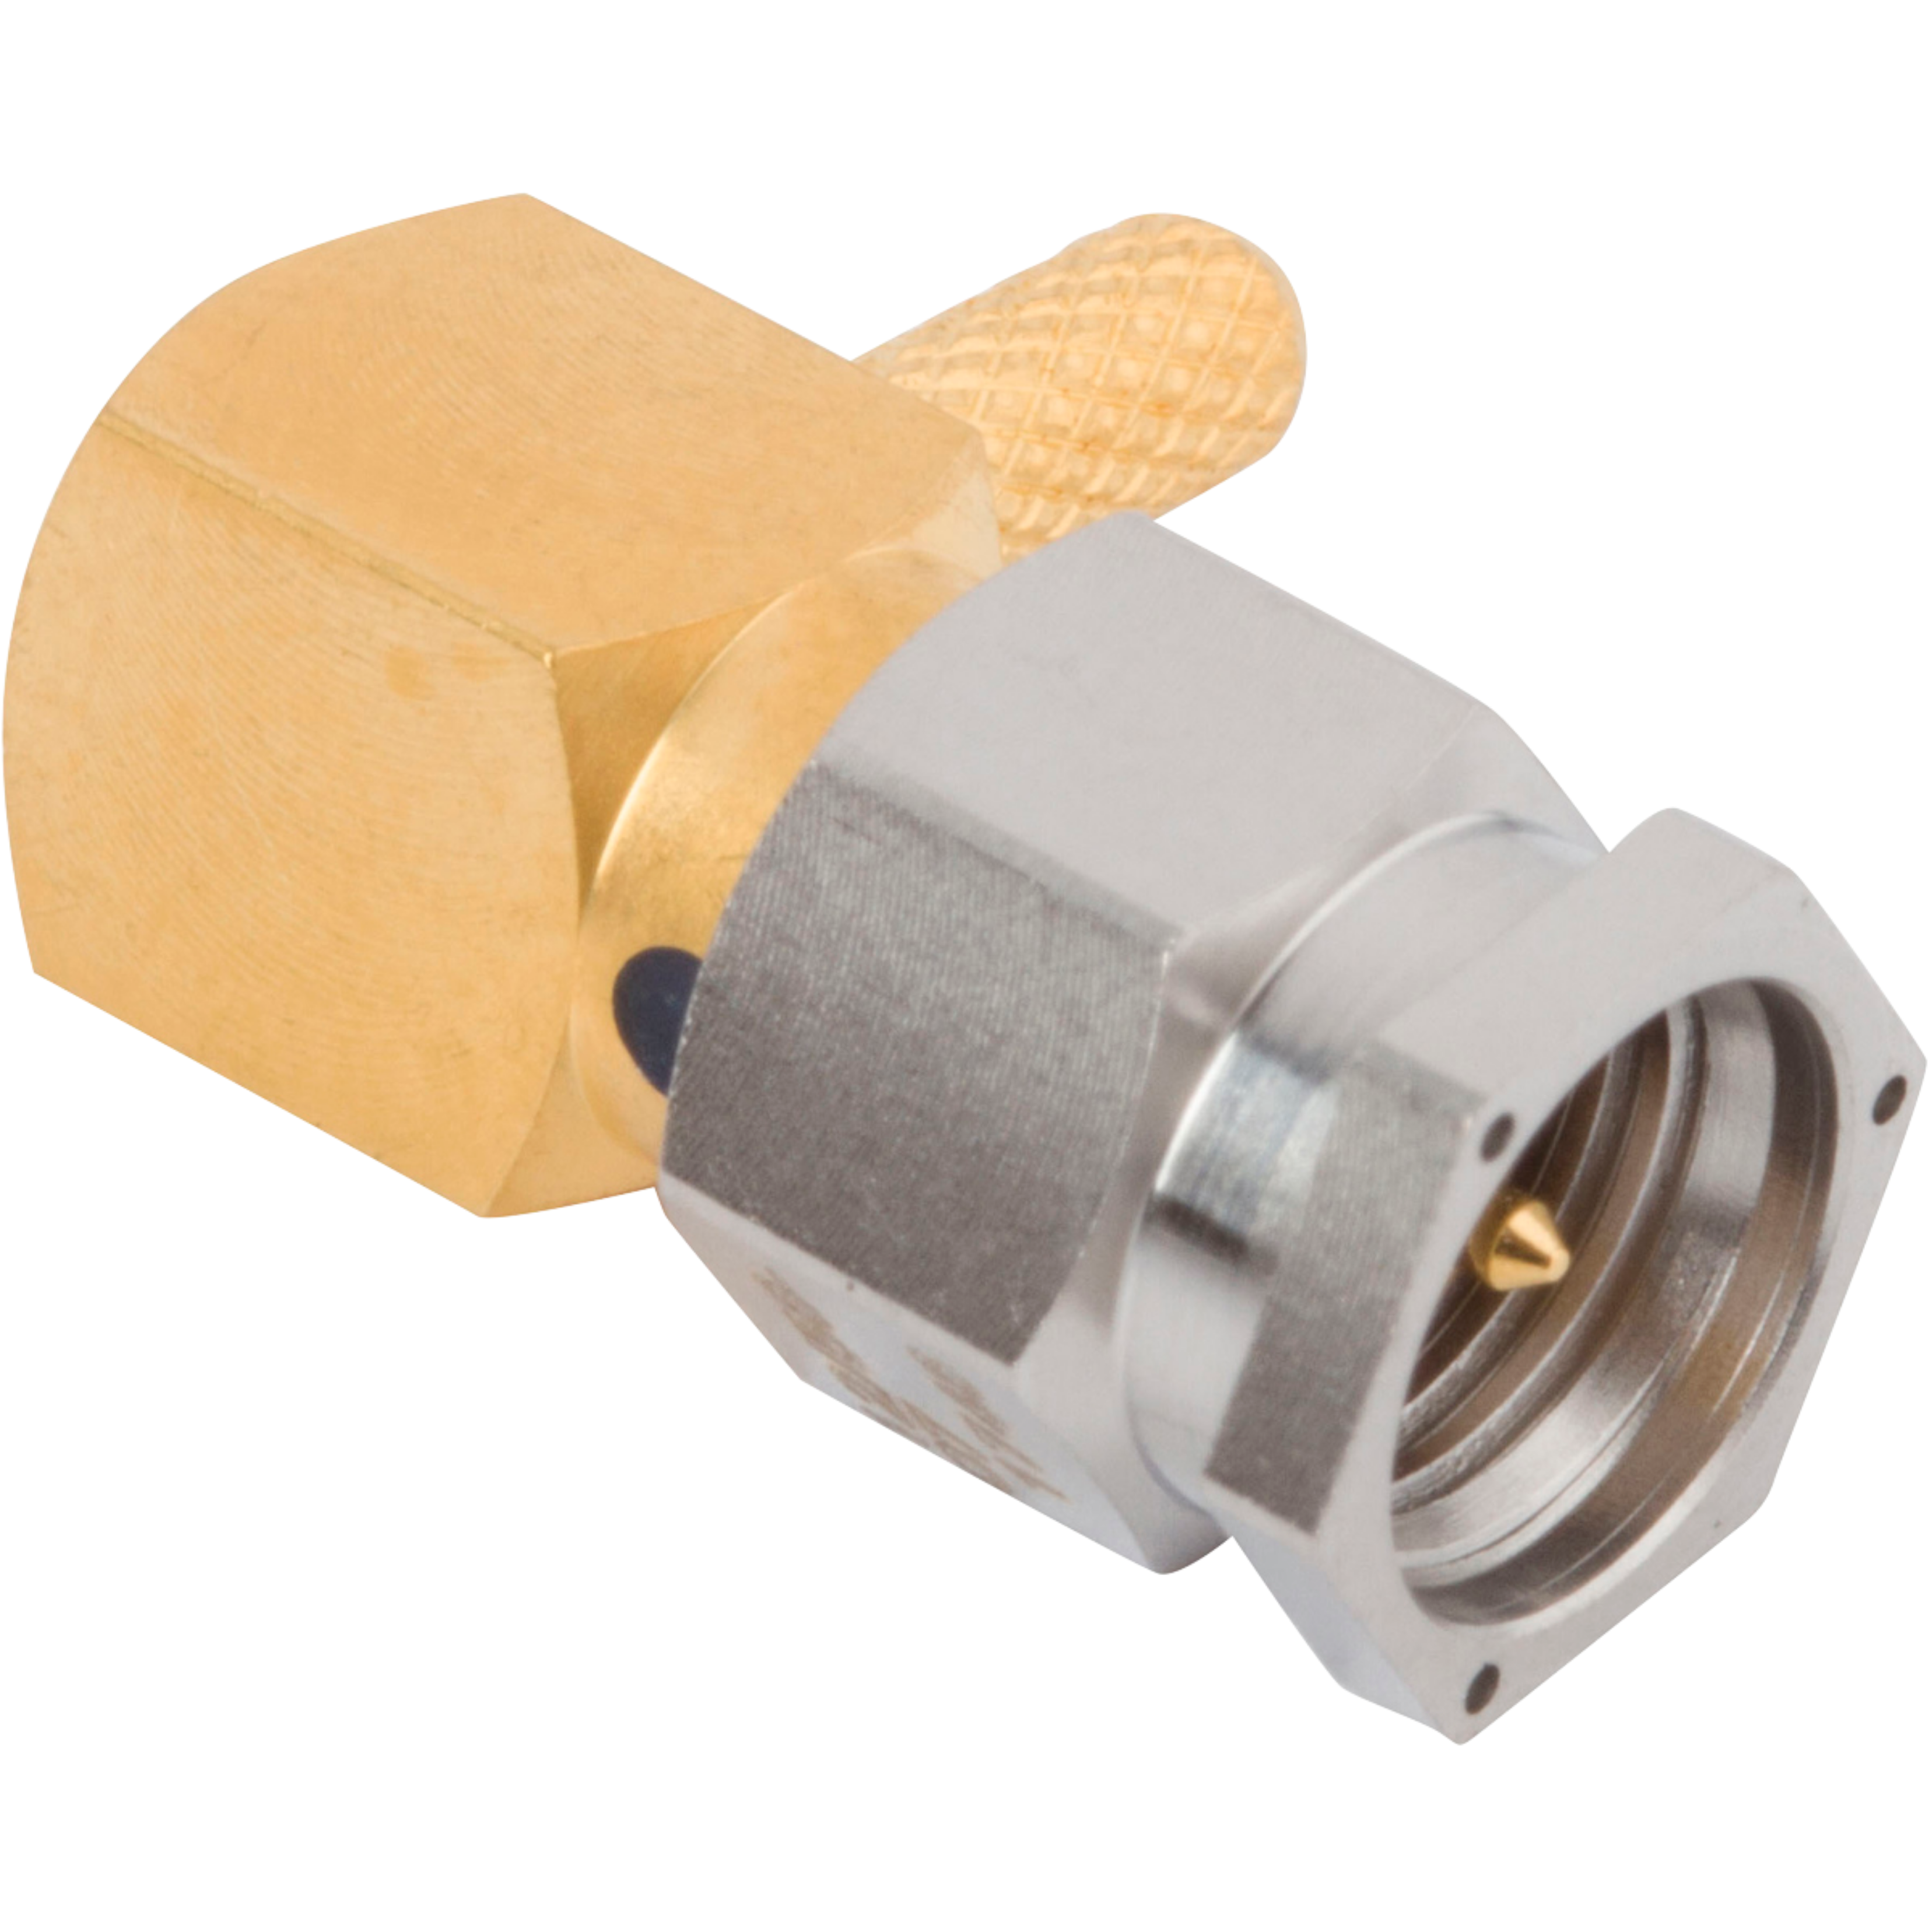 SMA Male Connector, Lockwire Holes, R/A for RG-174 Cable, M39012/56-3007